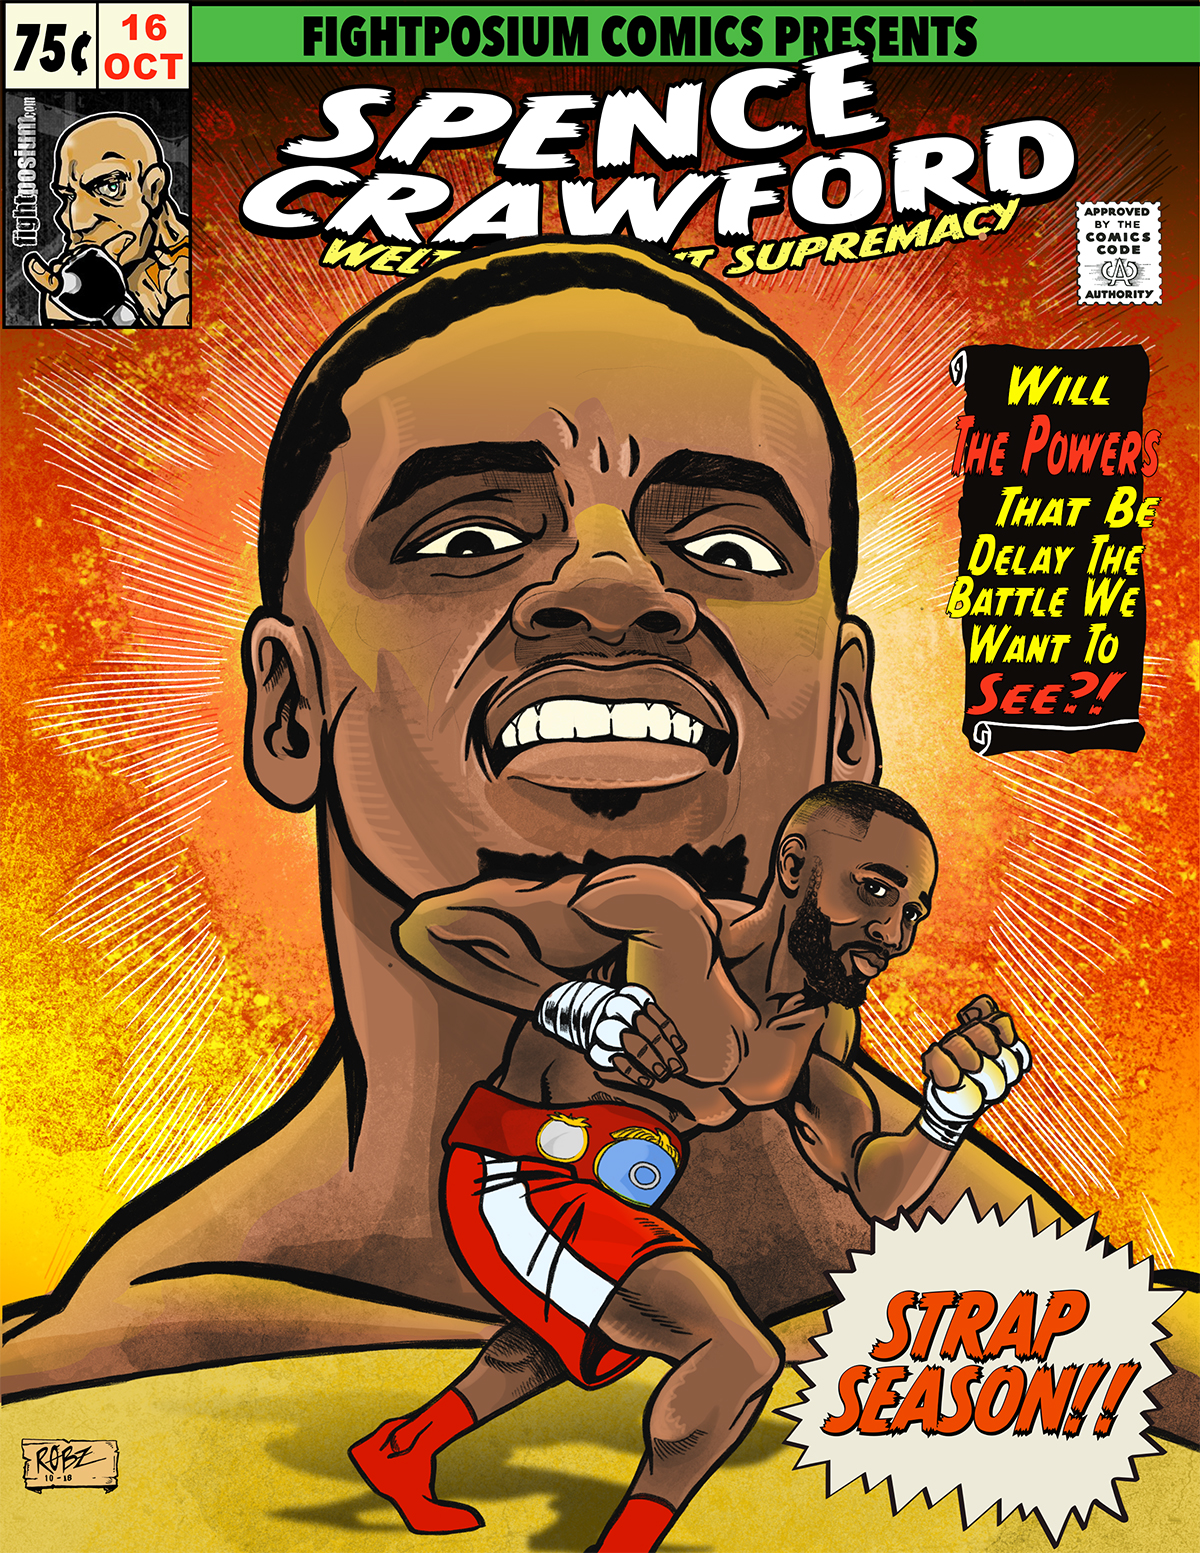 Errol Spence vs Terence Crawford - Strap Season!! Will The Powers That Be Delay The Fight We Want To See?!